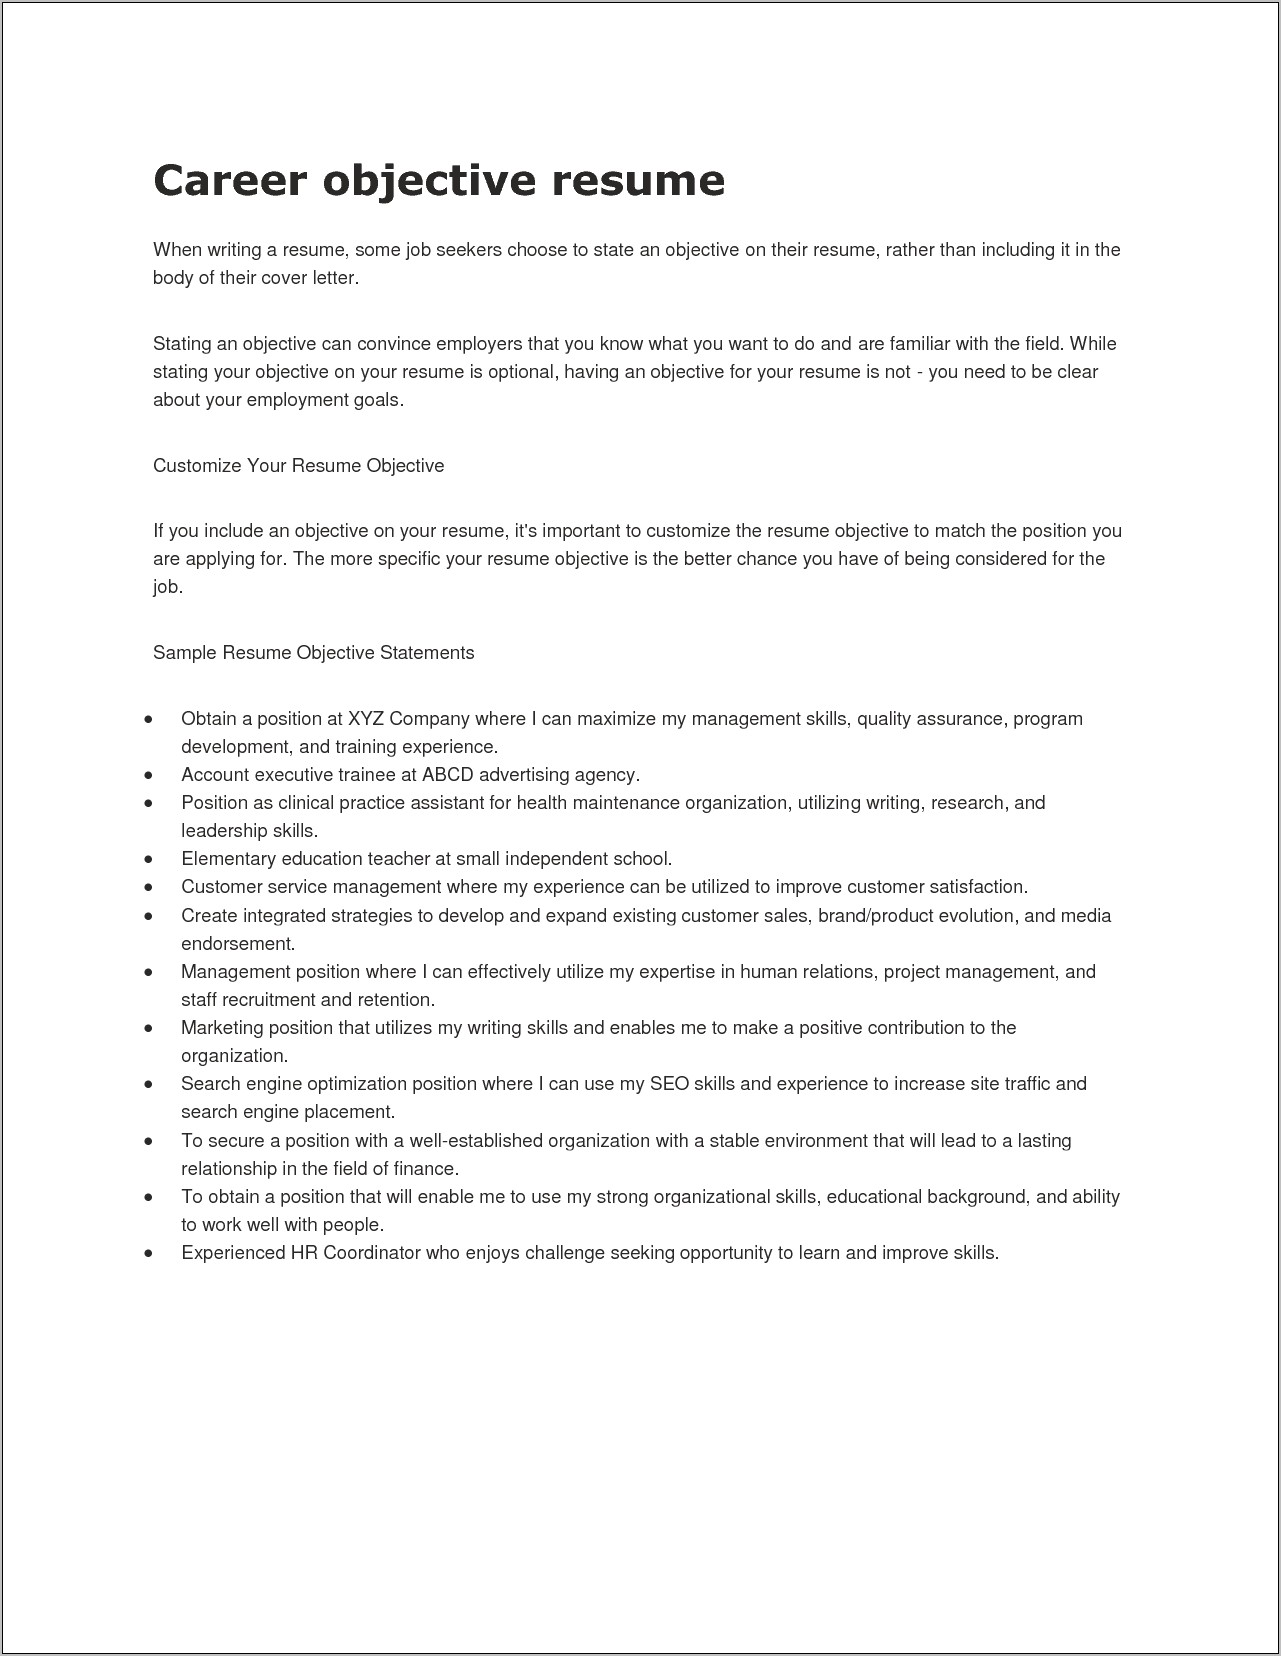 Is Career Objective Necessary In Resume